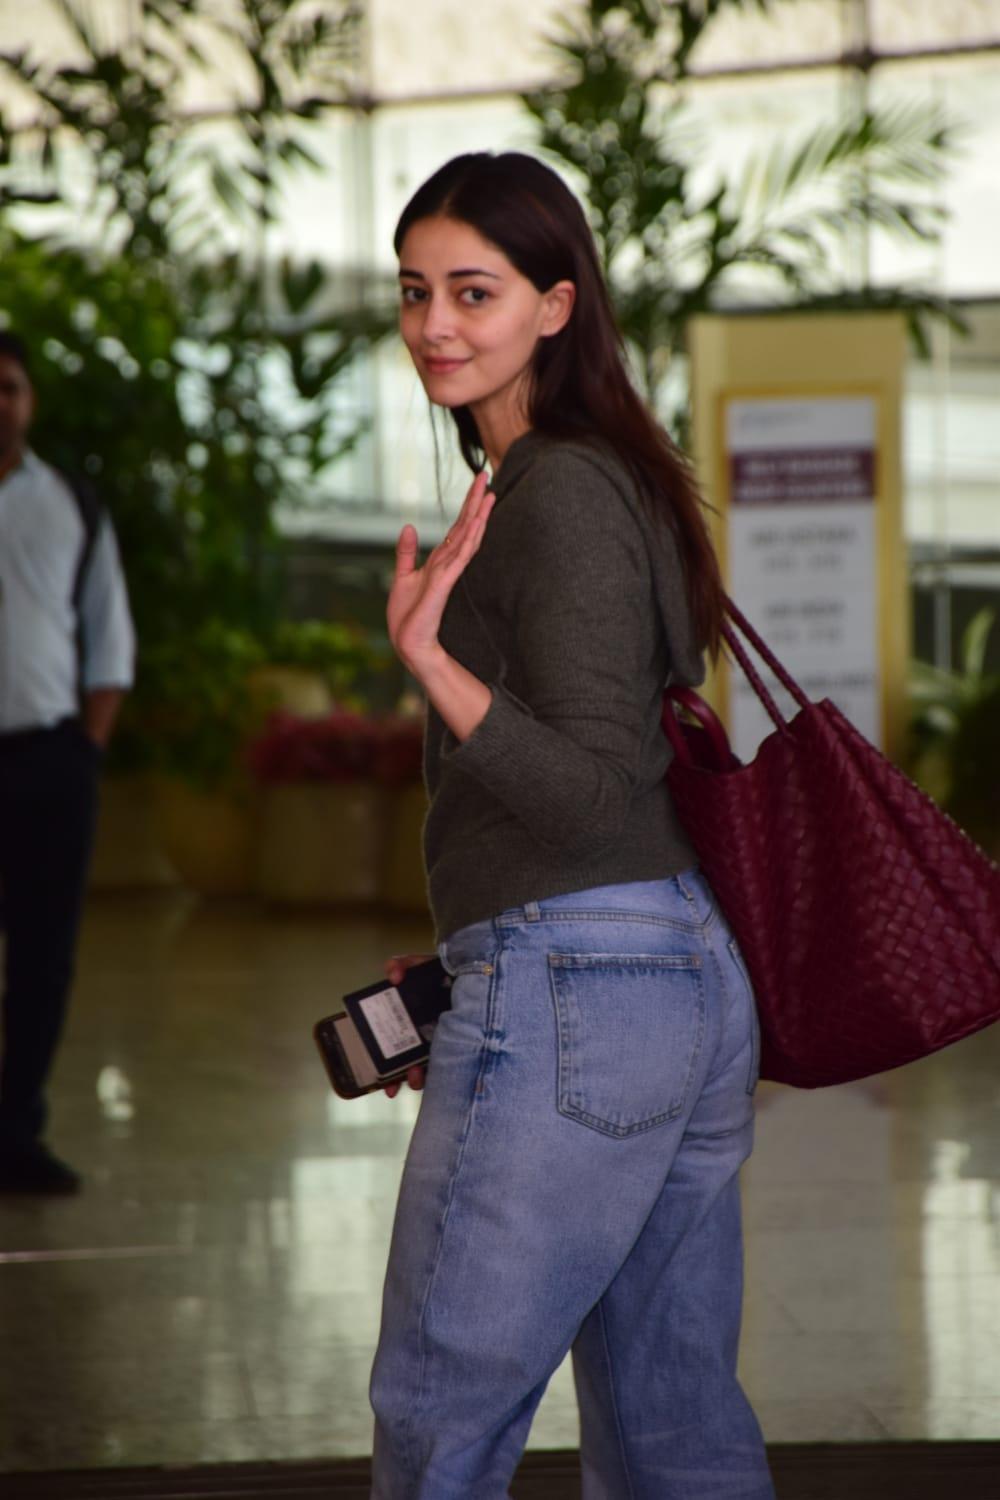 Ananya Panday was spotted at the airport looking chic. The actress posed and greeted the waiting paparazzi with a smile